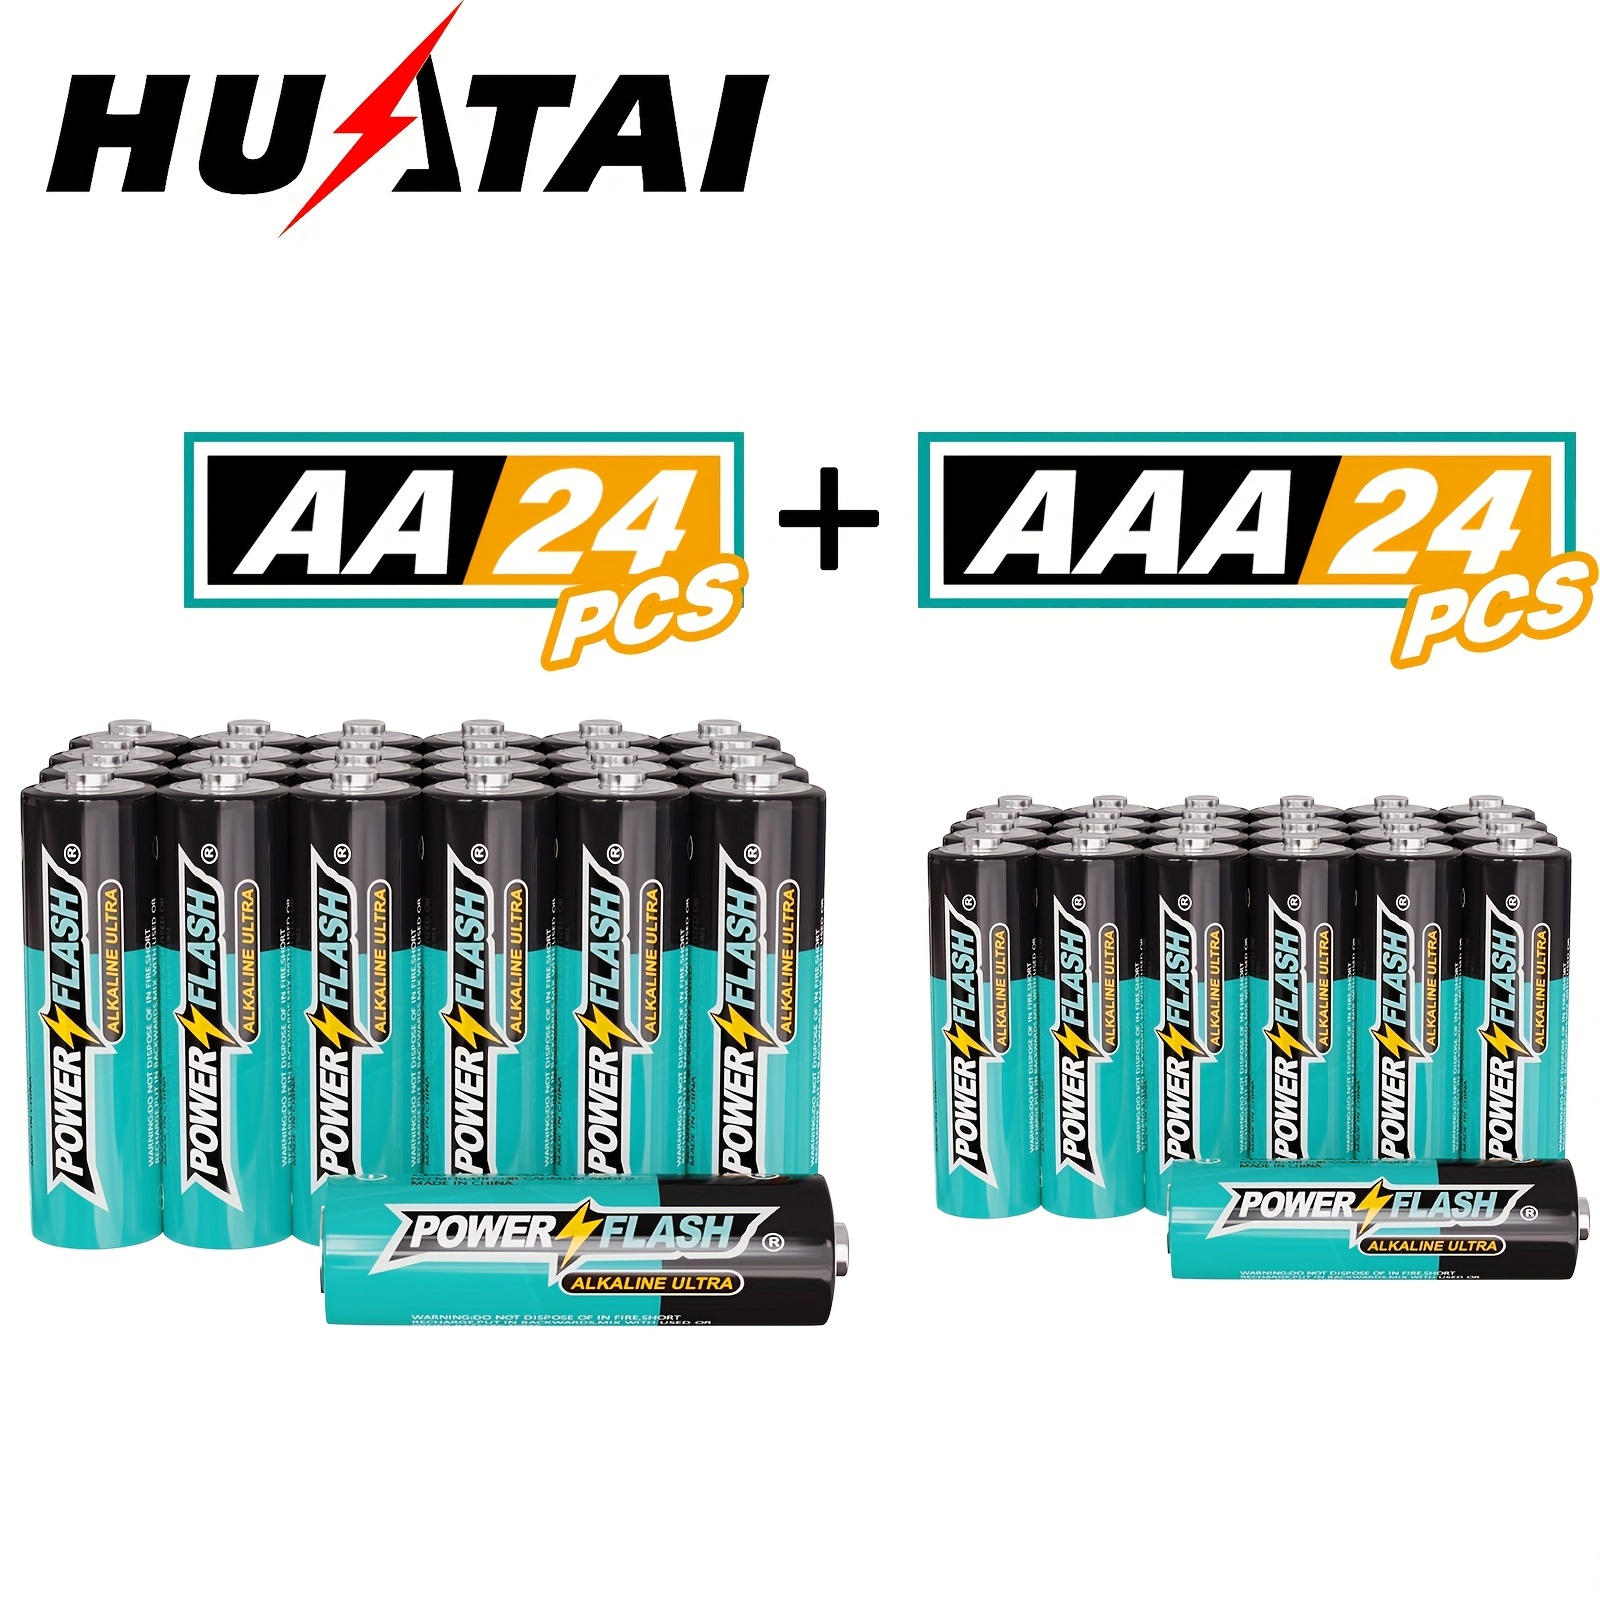 

Huatai Powerflash Aa-24pcs+aaa-24pcs Batteries, Provide Long Lasting Power, Alkaline Batteries For Home, Household Device, Office Equipment, Toys